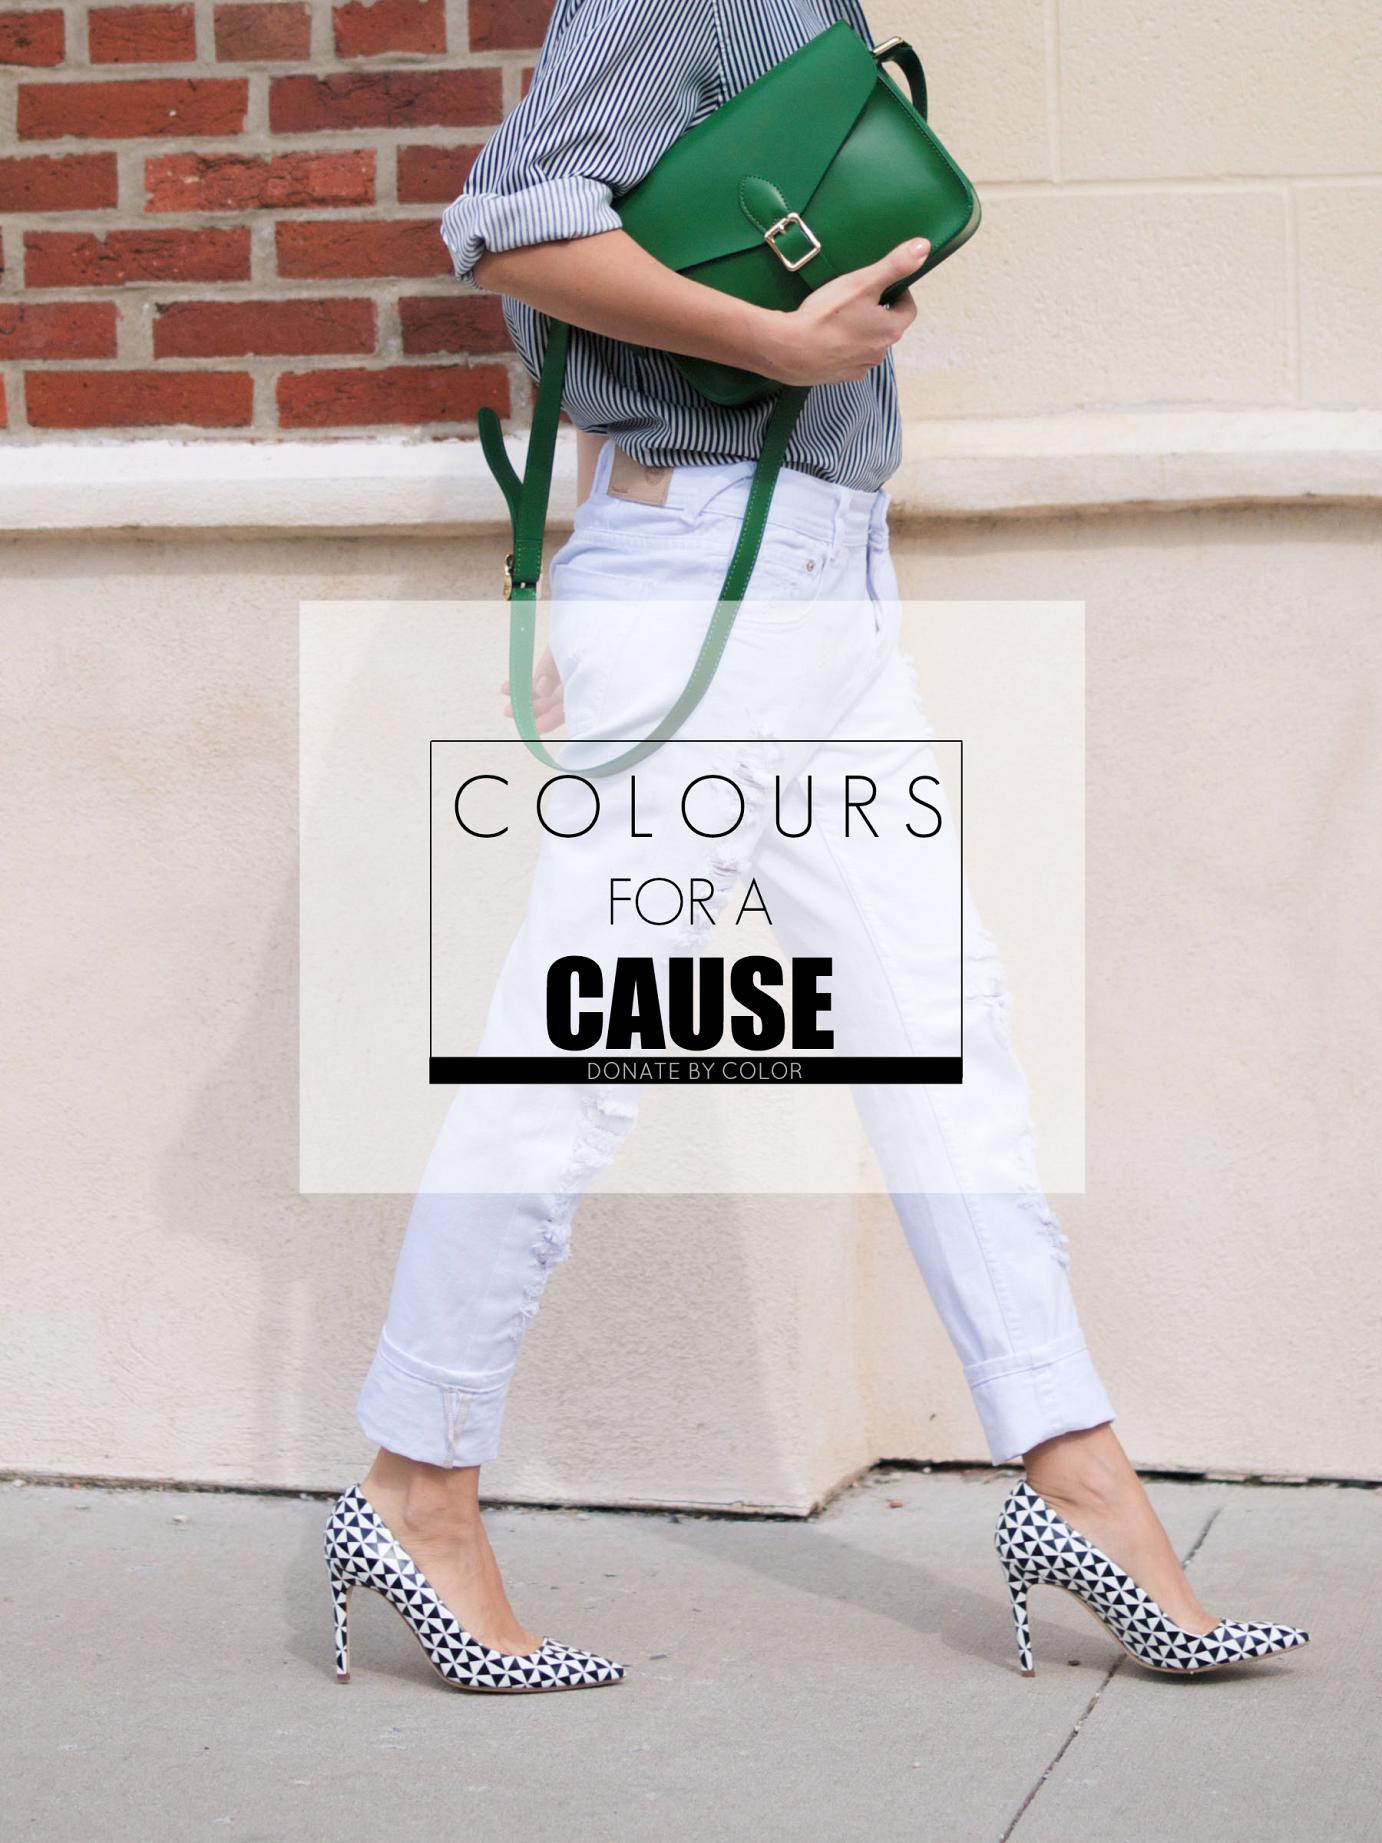 BITTERSWEET COLOURS, angela Roi bag, green bag, boyfriend jeans, white jeans, j.crew shoes, stripes, street style. ray ban, lord and taylor,